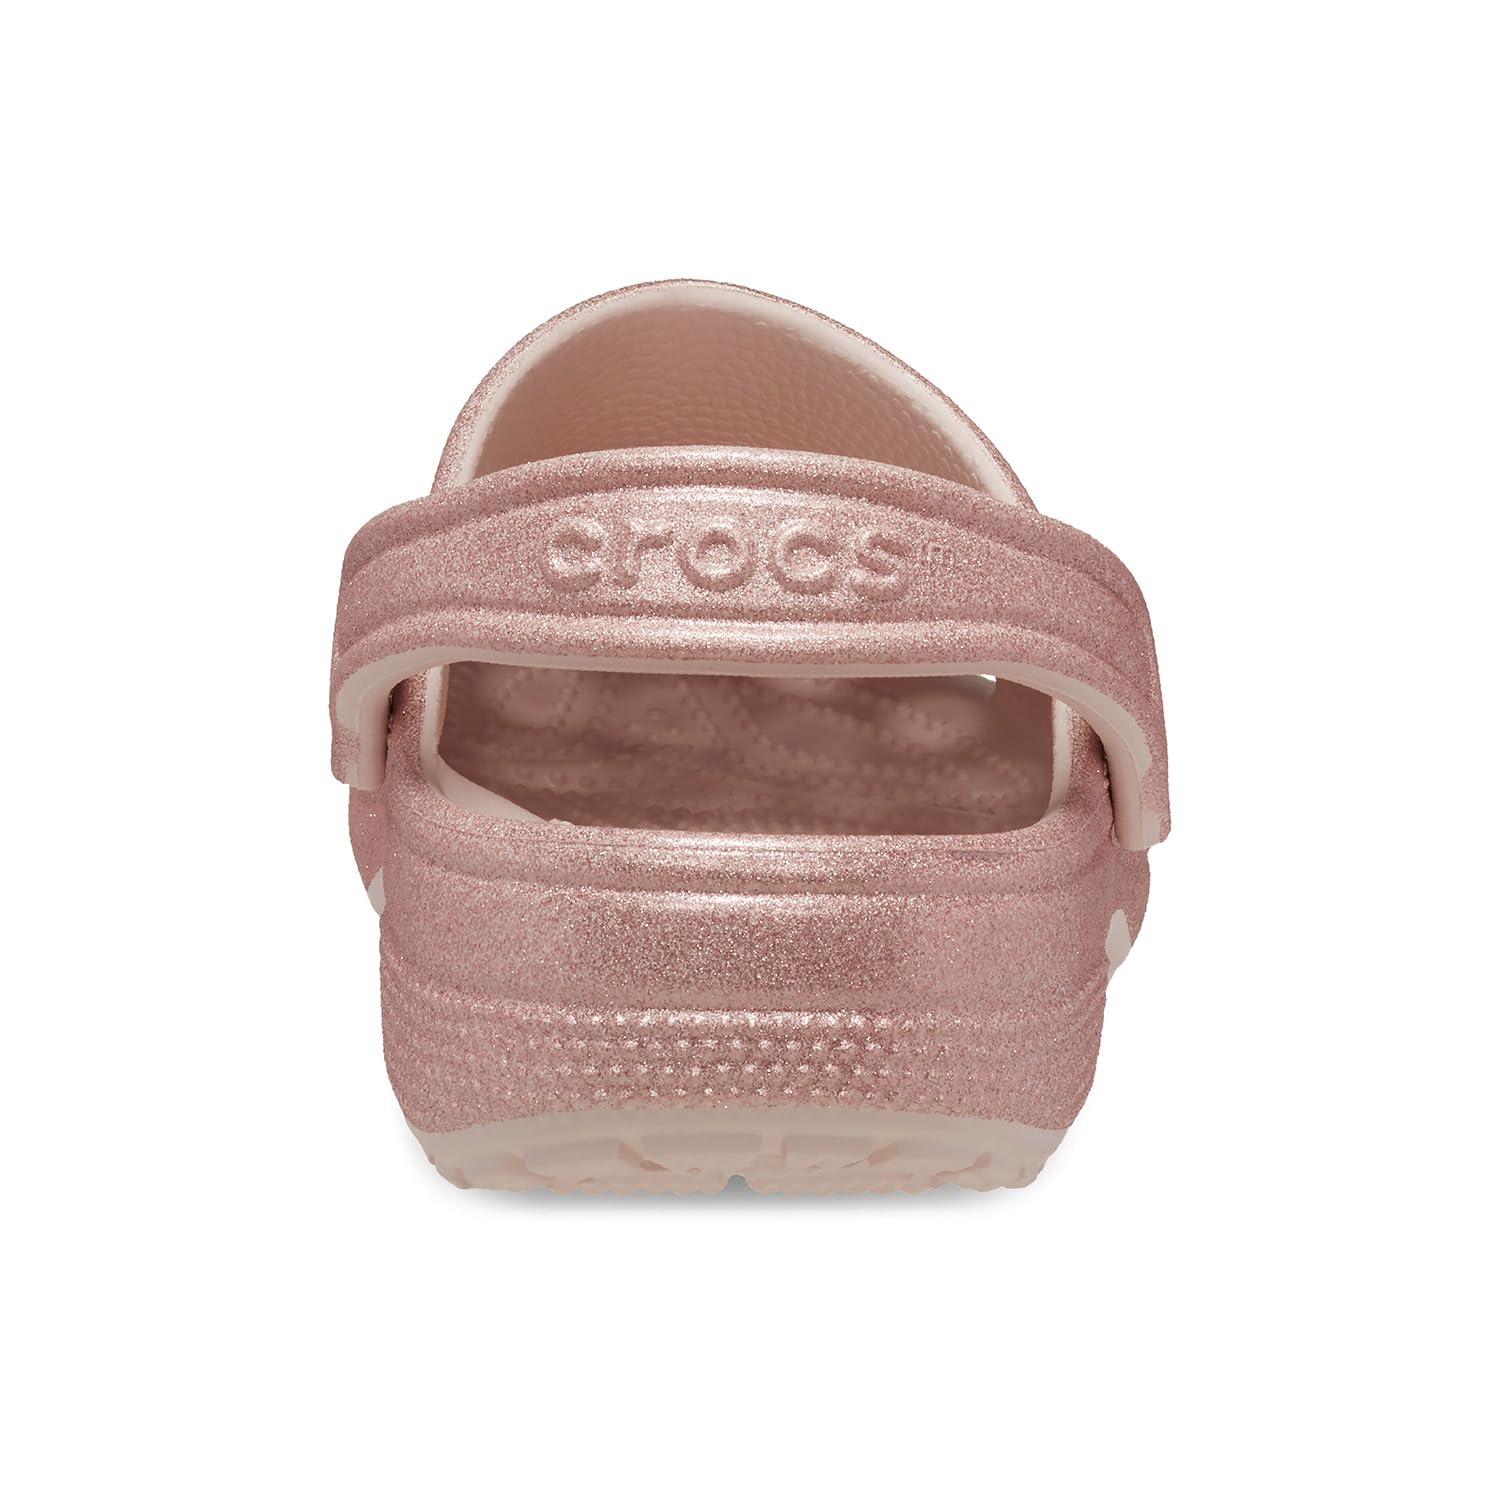 Crocs Unisex-Adult Classic Sparkly Clog, Metallic and Glitter Shoes